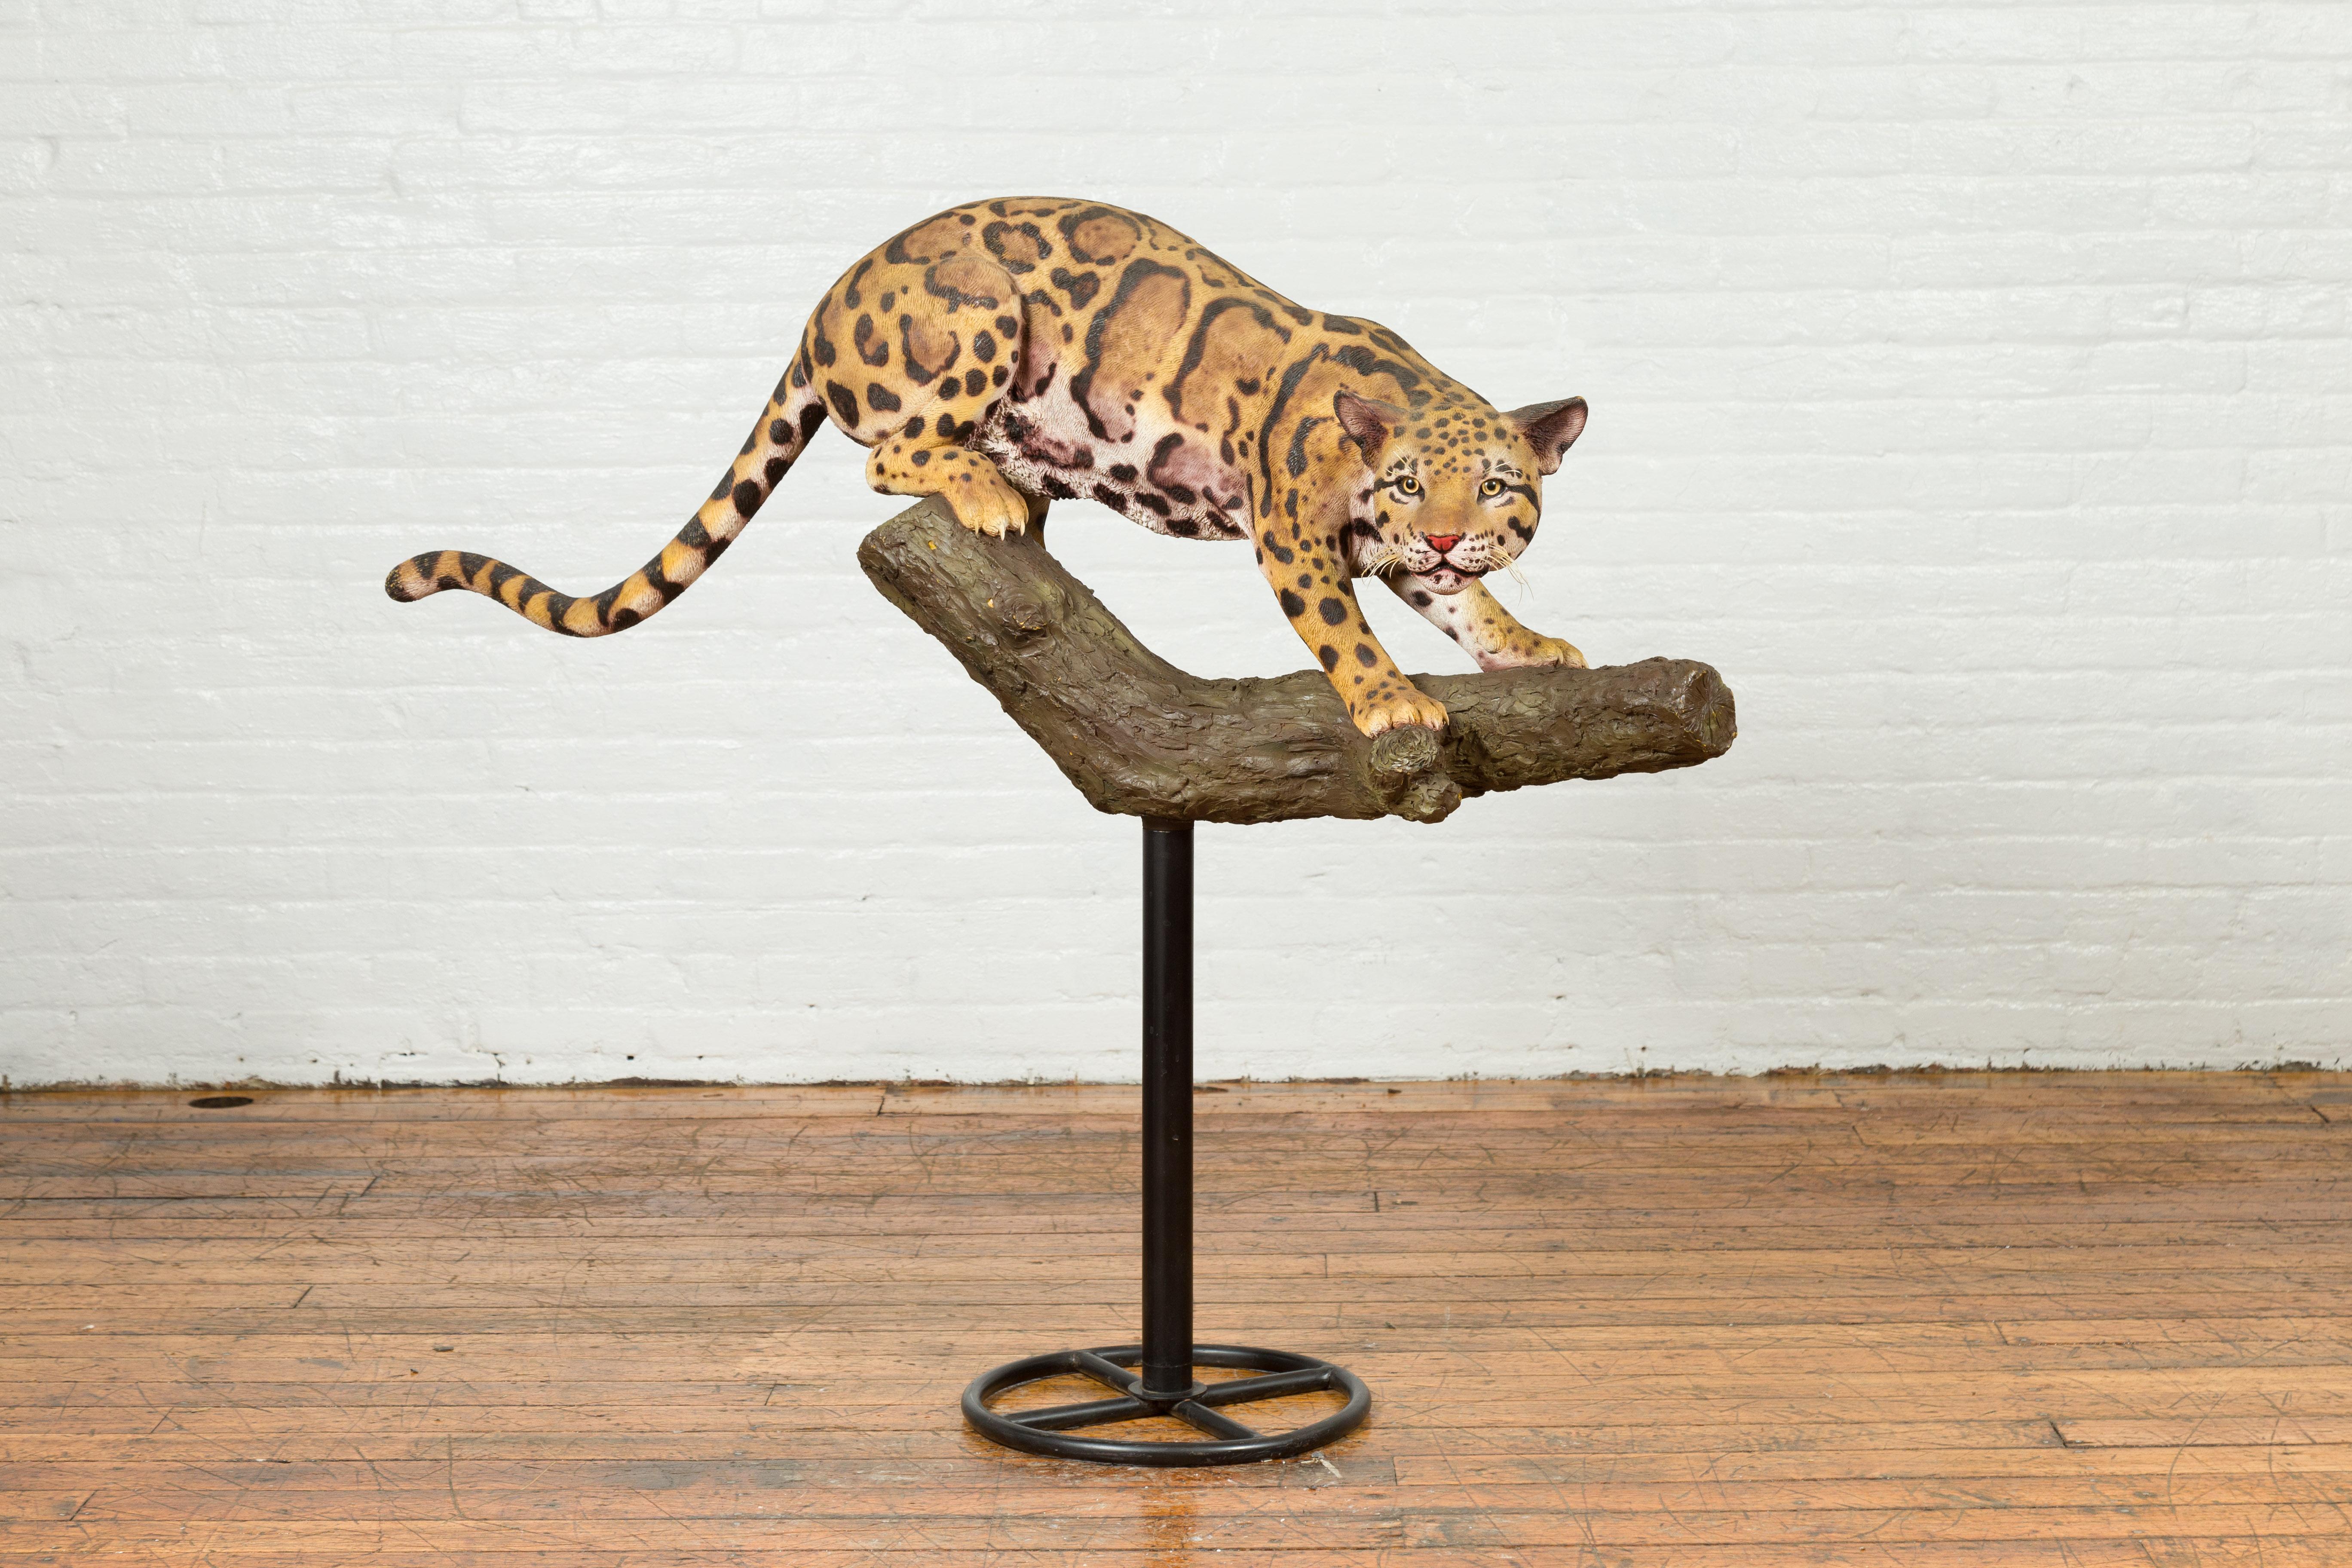 A contemporary fiberglass leopard sculpture mounted on a tree base. Originally designed as a prototype for a collection of fiberglass statues, this sculpture attracts immediately our attention with its striking subject and great realism. The leopard